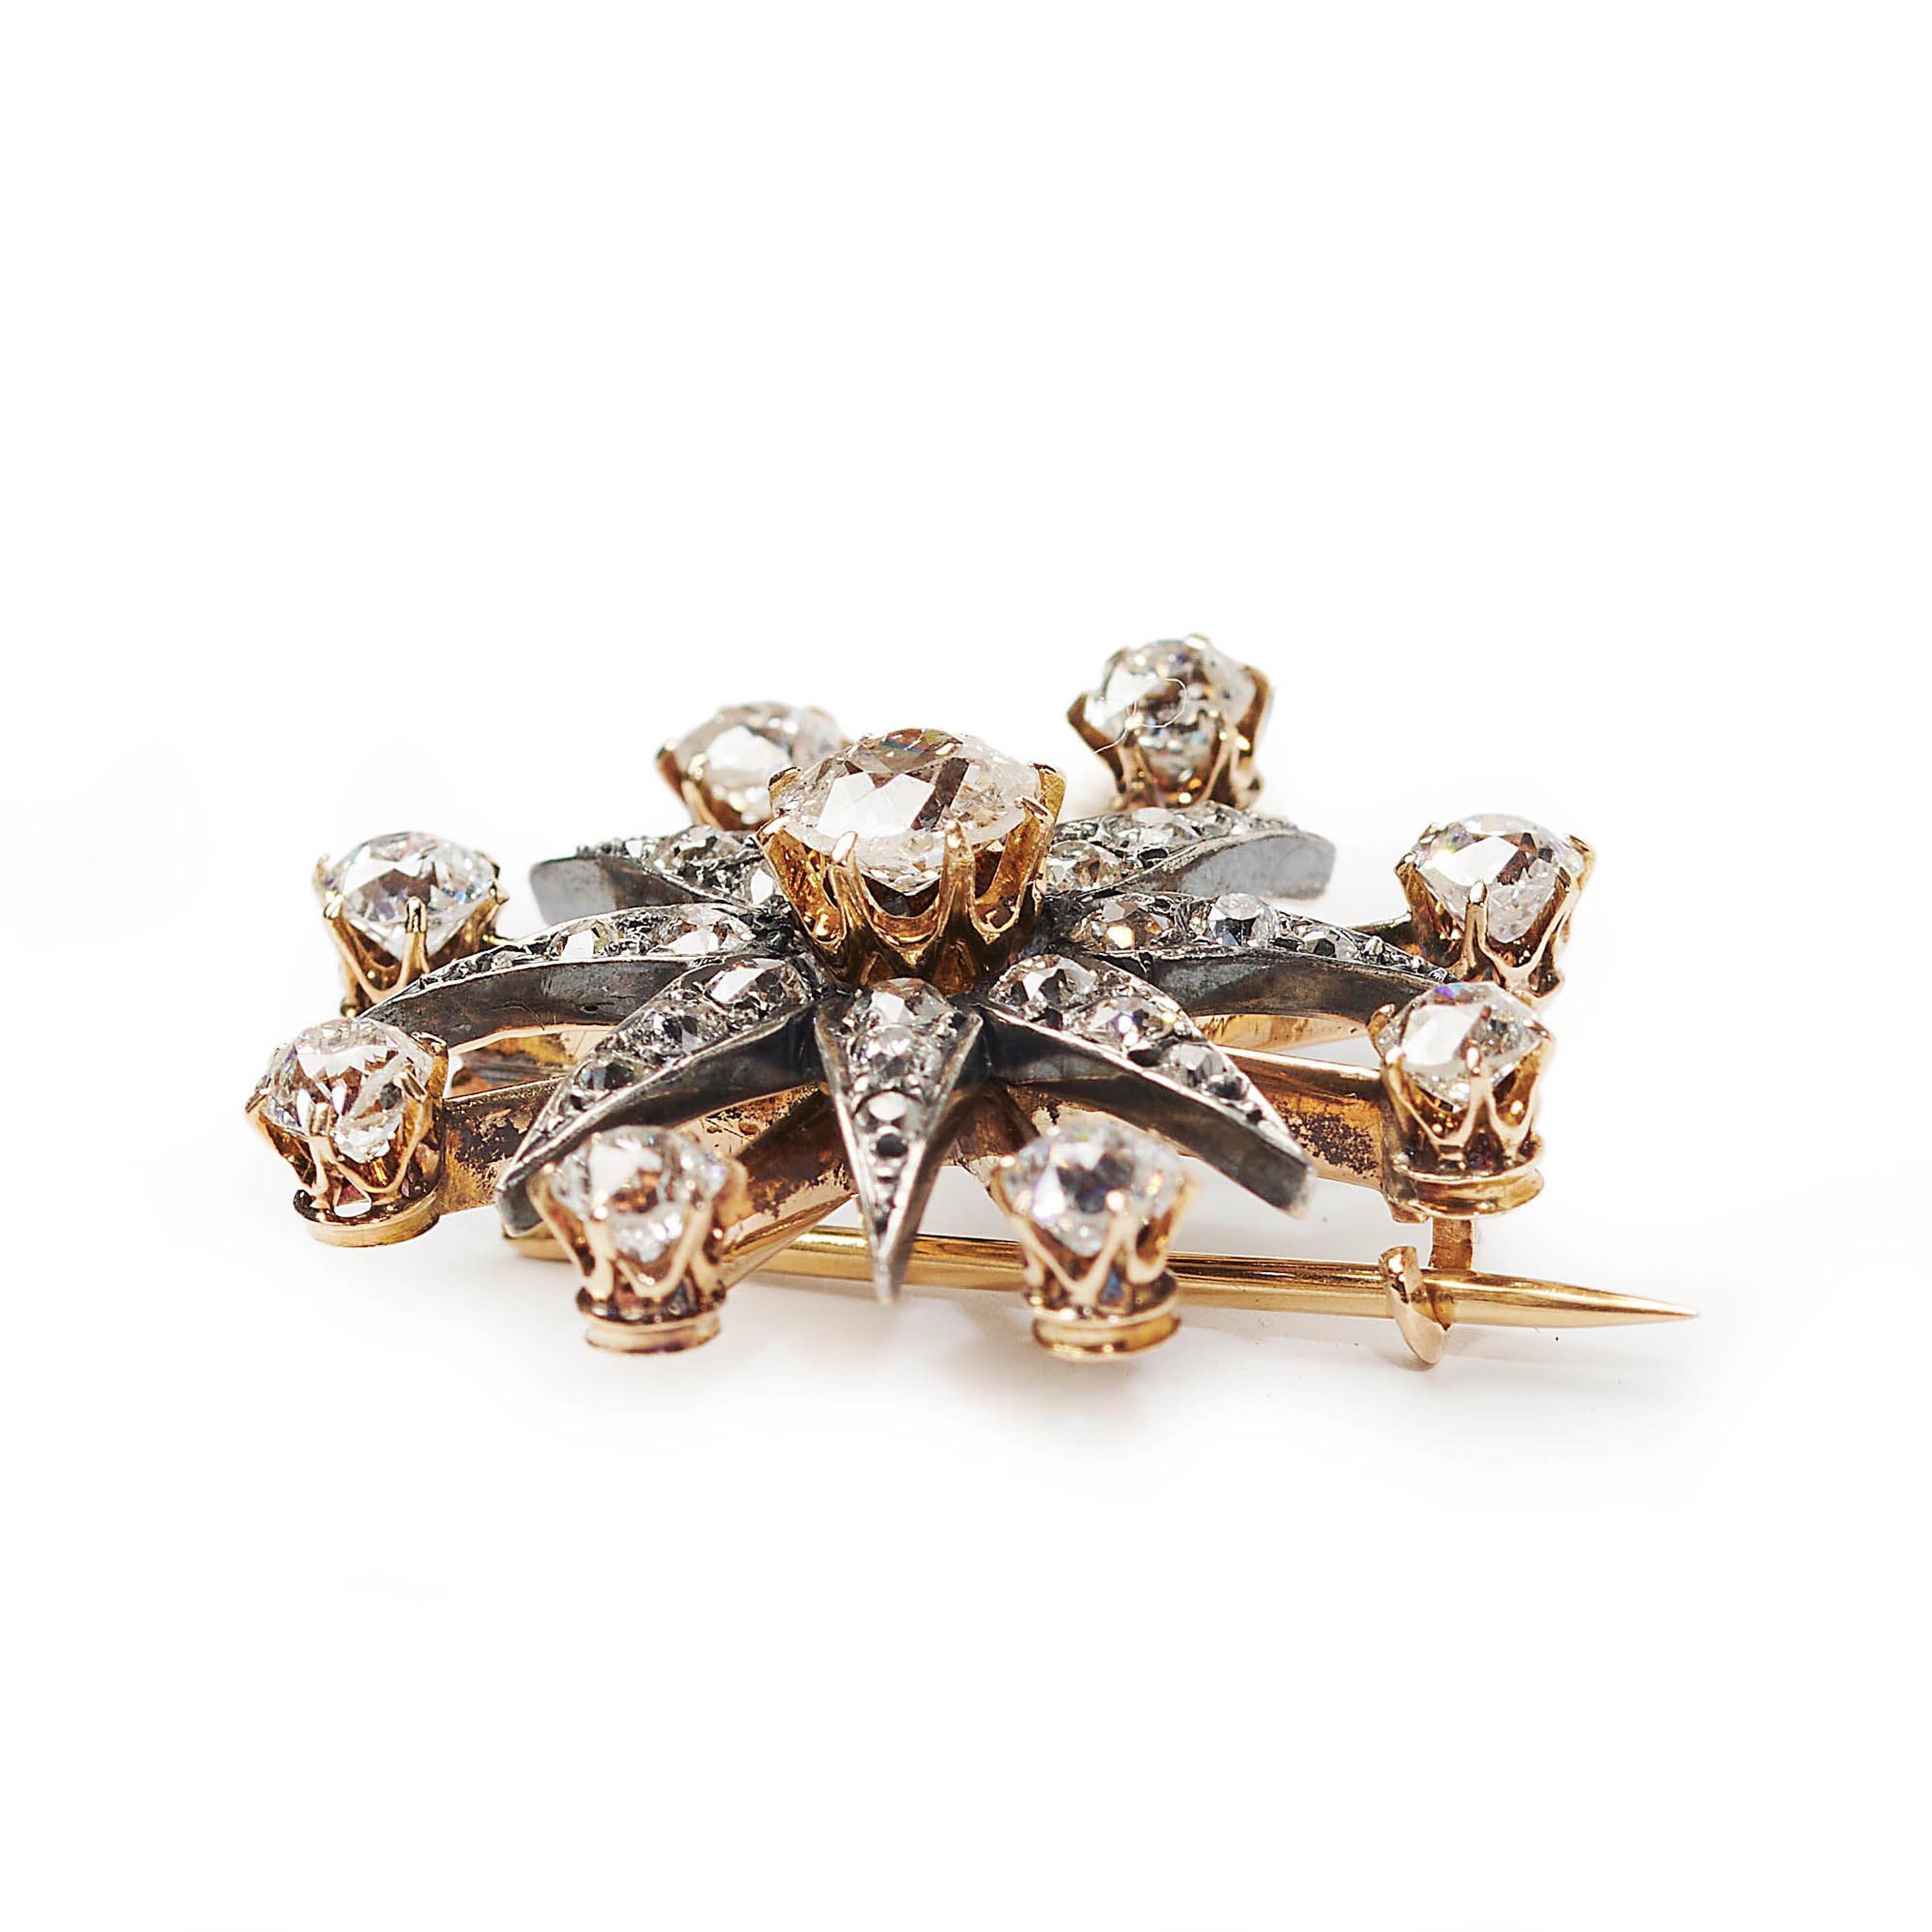 An antique, diamond star brooch, with a raised, old-cut diamond, in a gold claw setting, in the centre of an eight pointed silver star, each ray set with three, graduating, old-cut diamonds, in grain settings, with single diamond rays, in crown claw